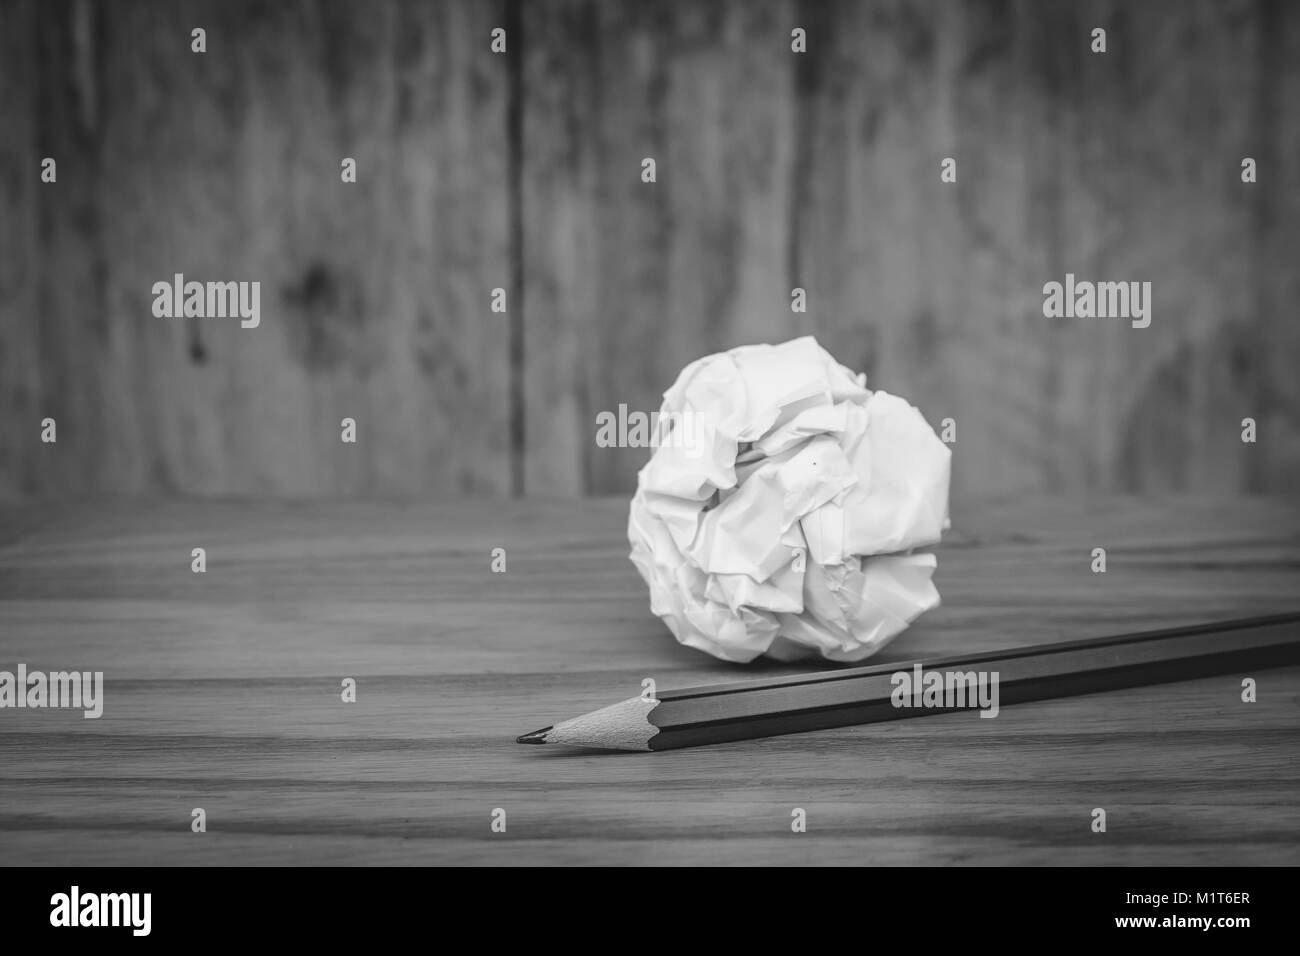 Business Creative and Idea Concept Top view of three pencil with white crumpled paper ball put on wooden floor in black and white image. Stock Photo